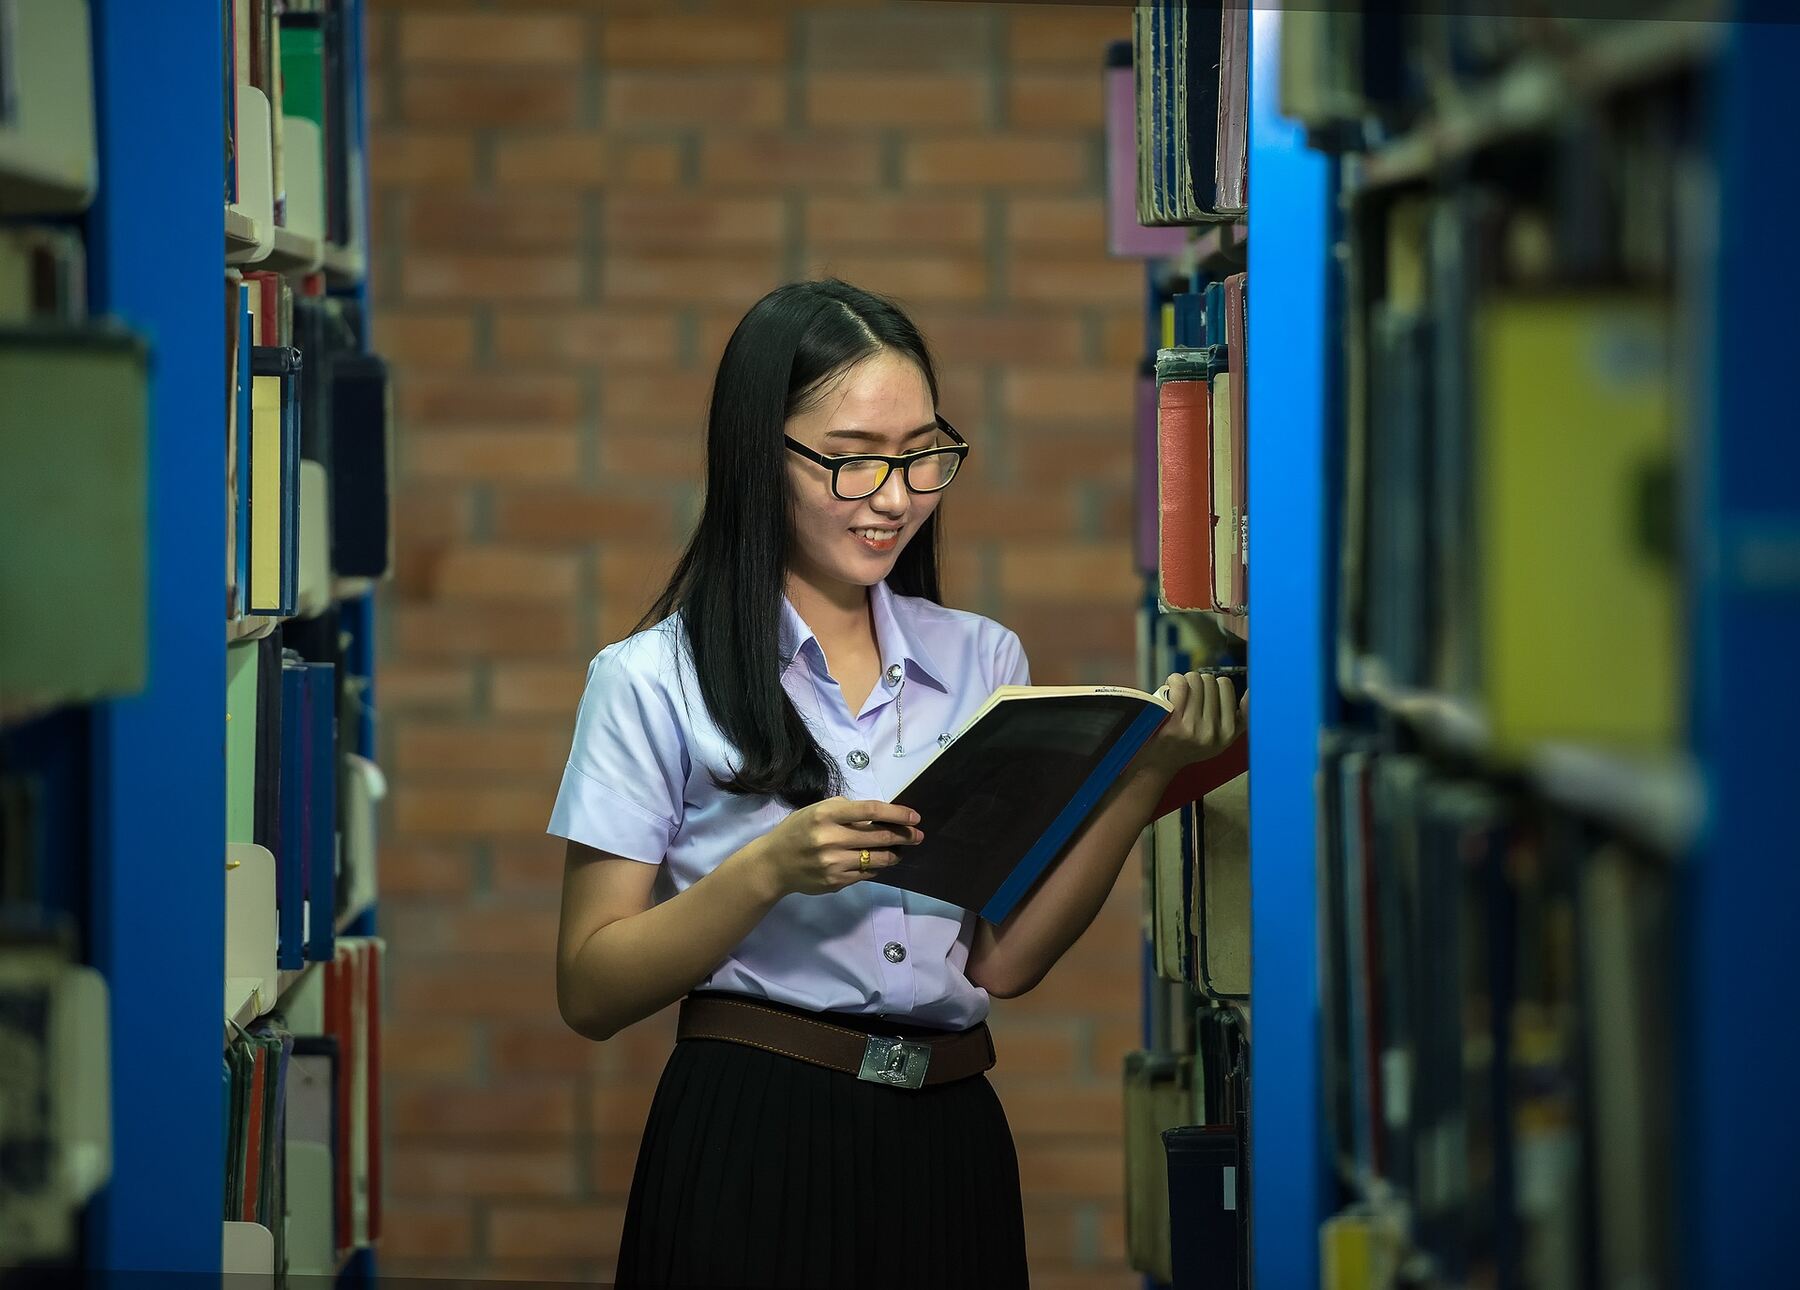 A young woman in glasses reading a book while standing in a library, surrounded by shelves of books